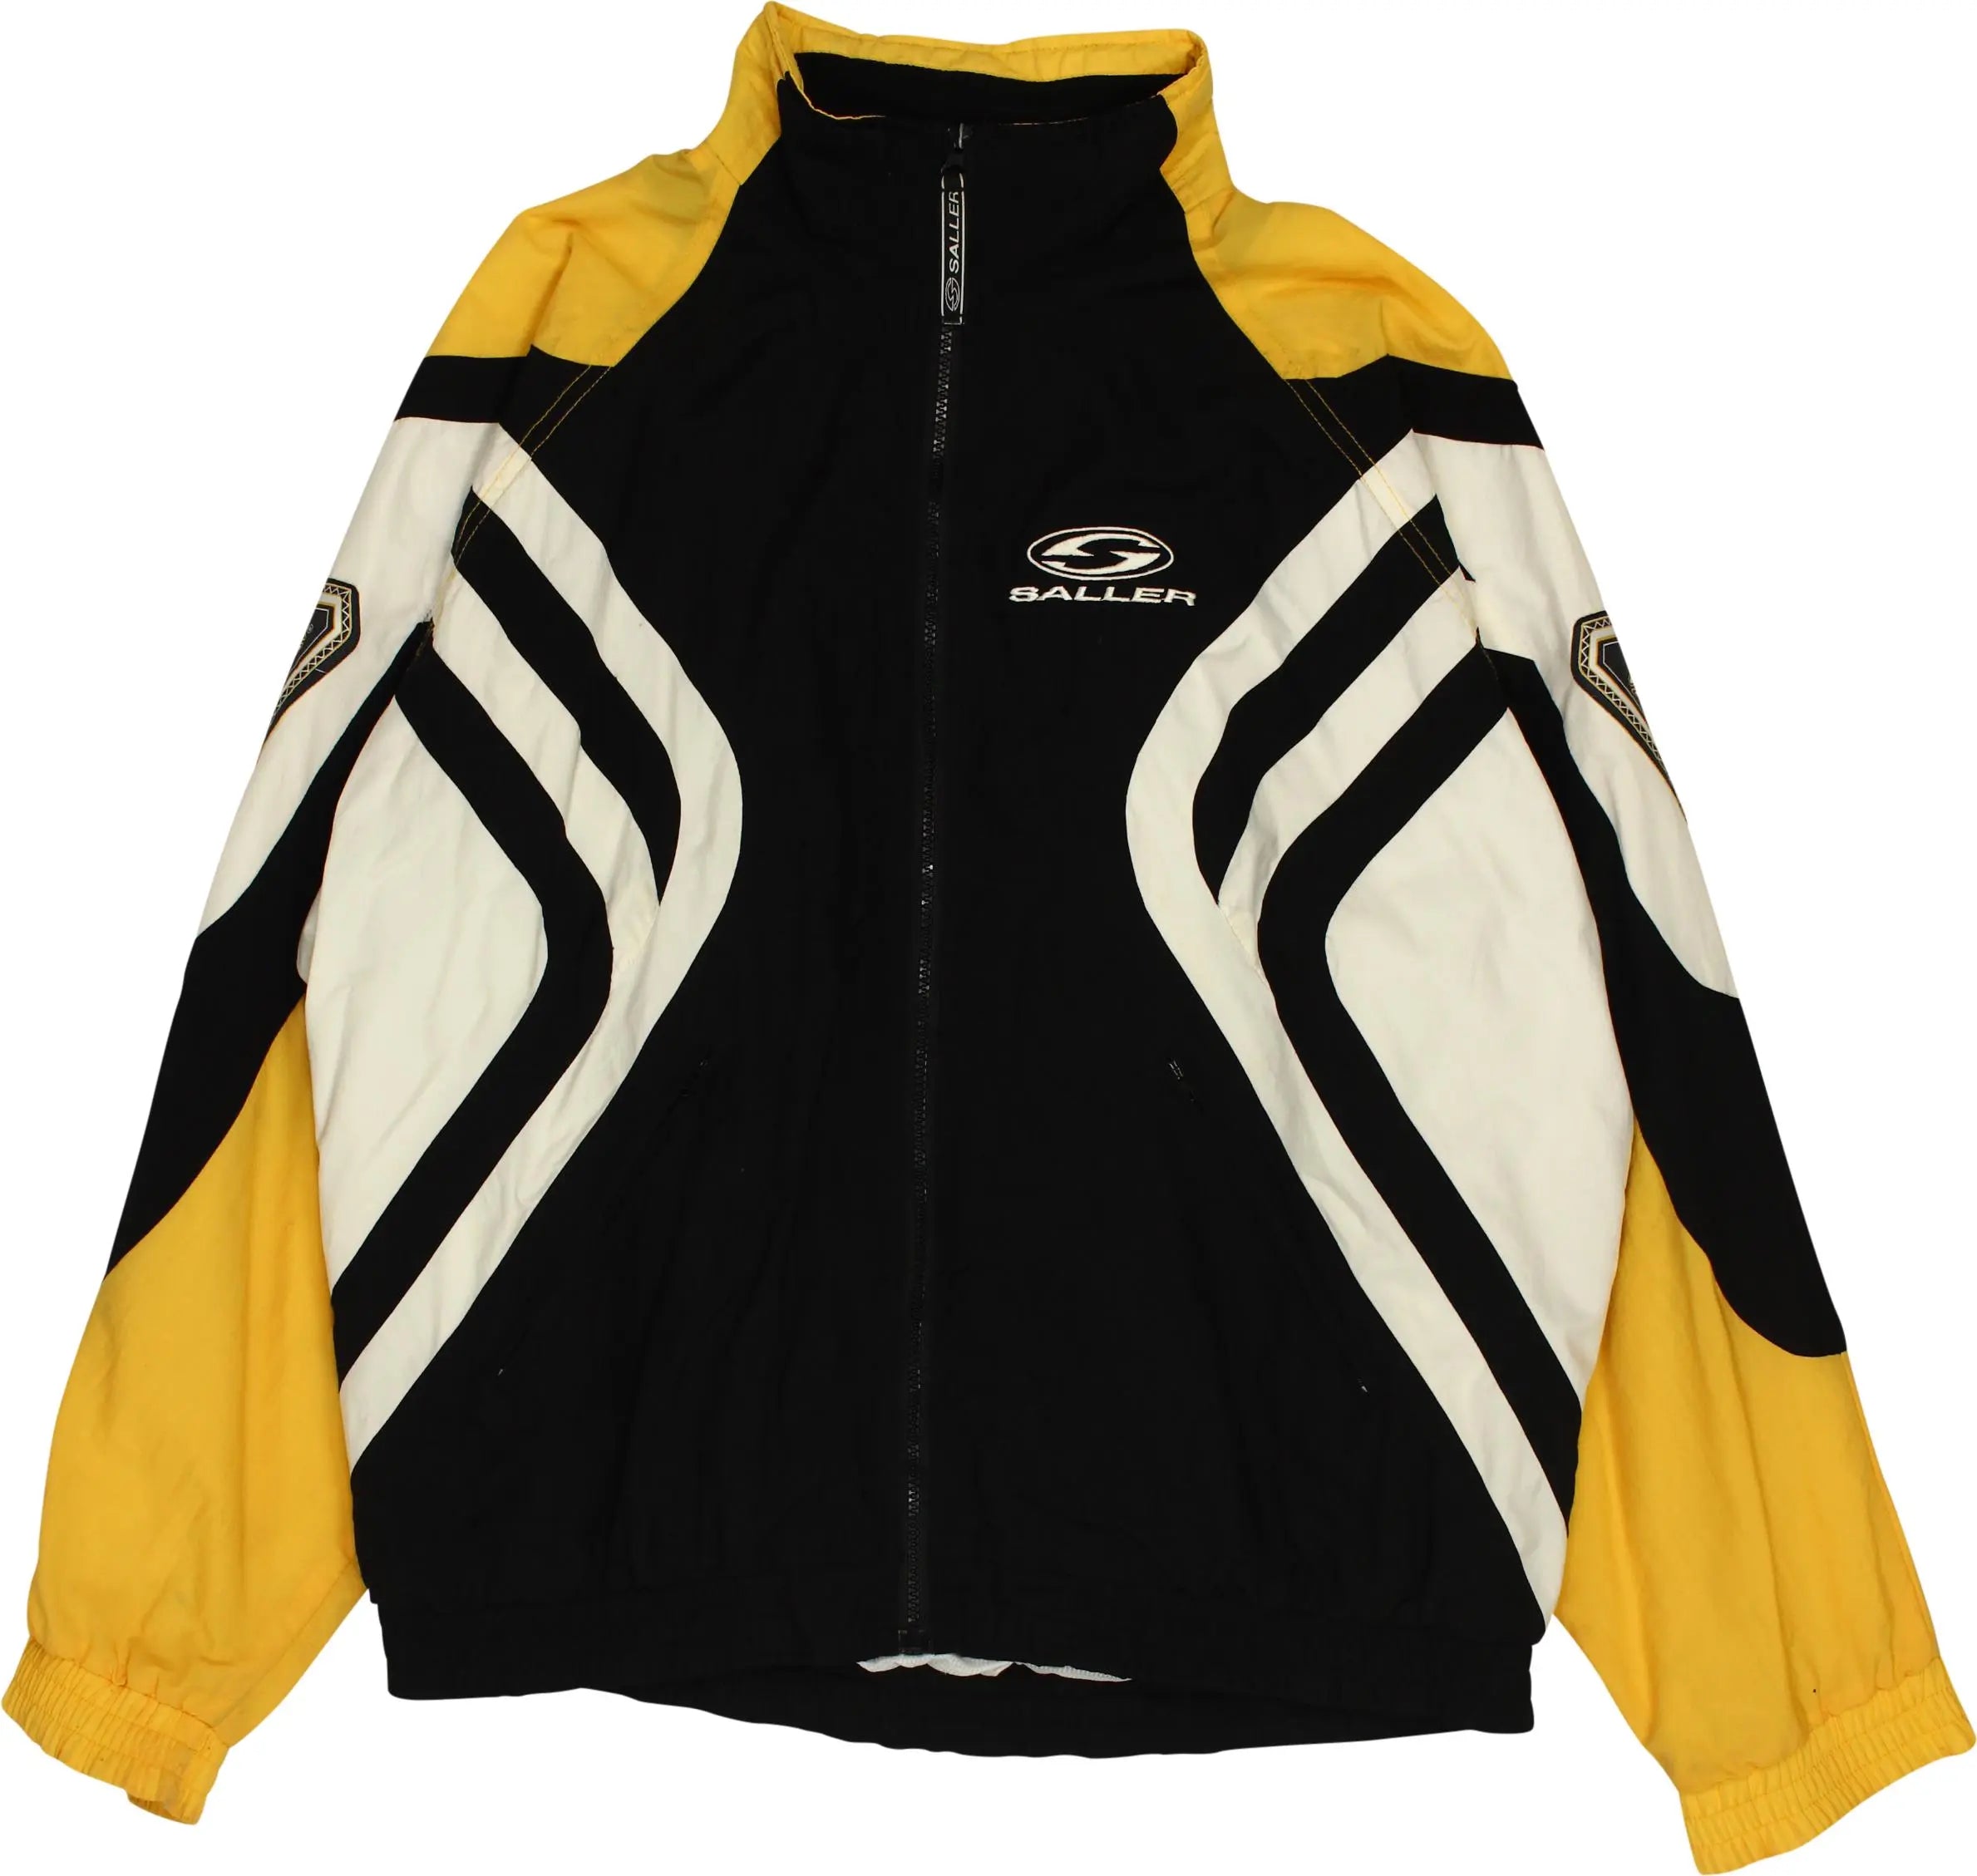 Saller - 90s/00s Track Jacket by Saller- ThriftTale.com - Vintage and second handclothing